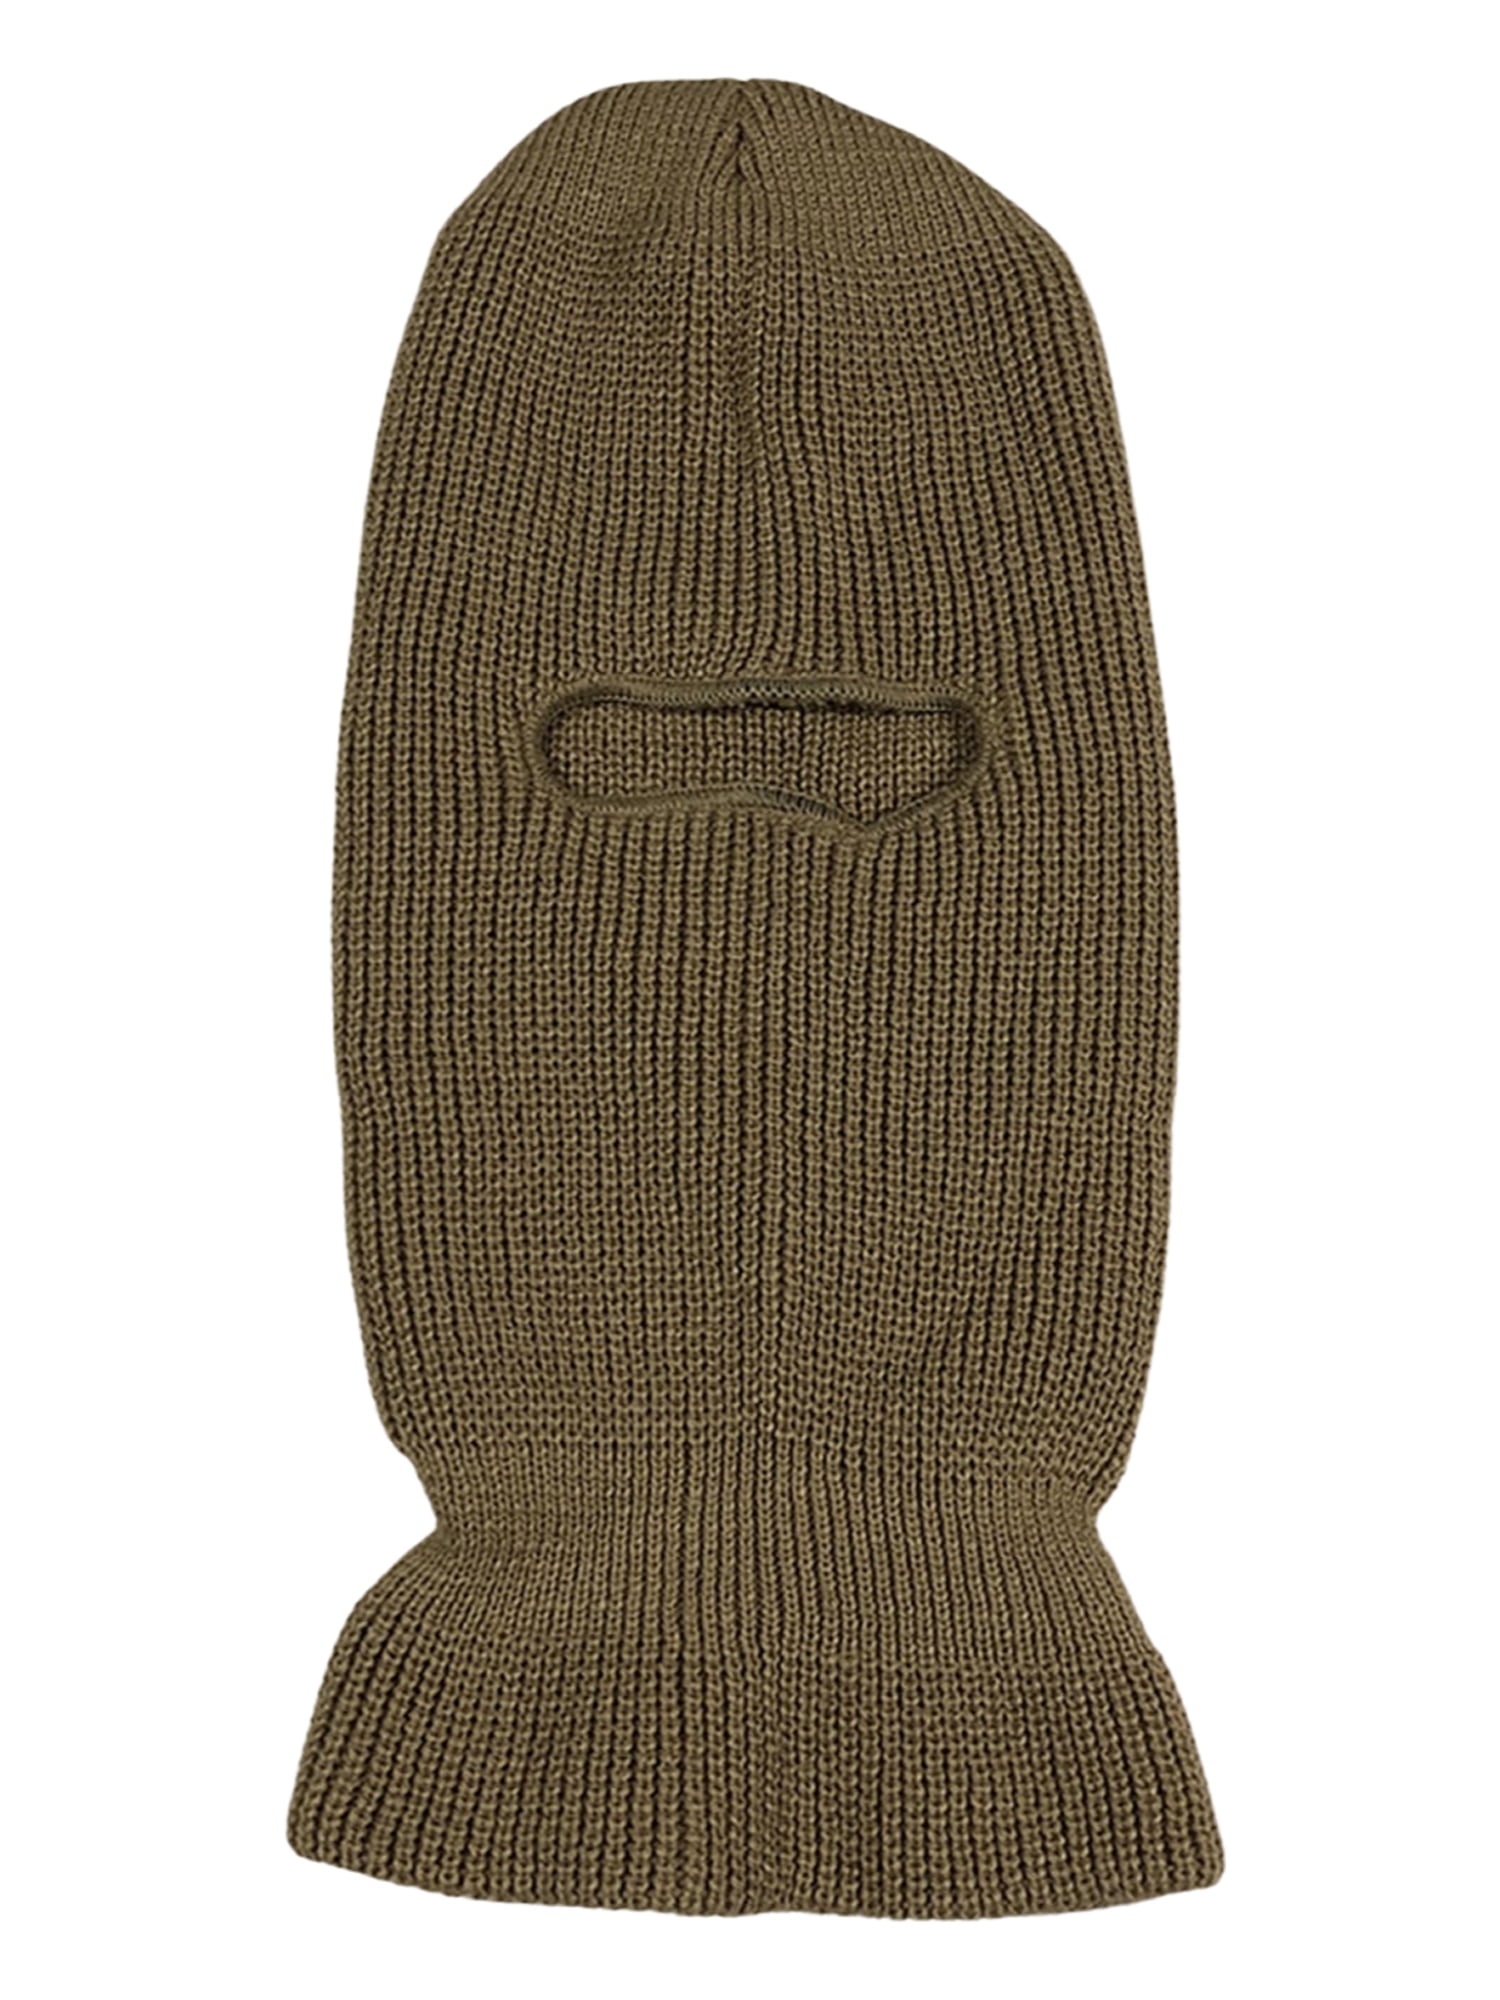 Ski Face Mask Hat Winter Knitted Face Cover Beanie Cap Walmart.com